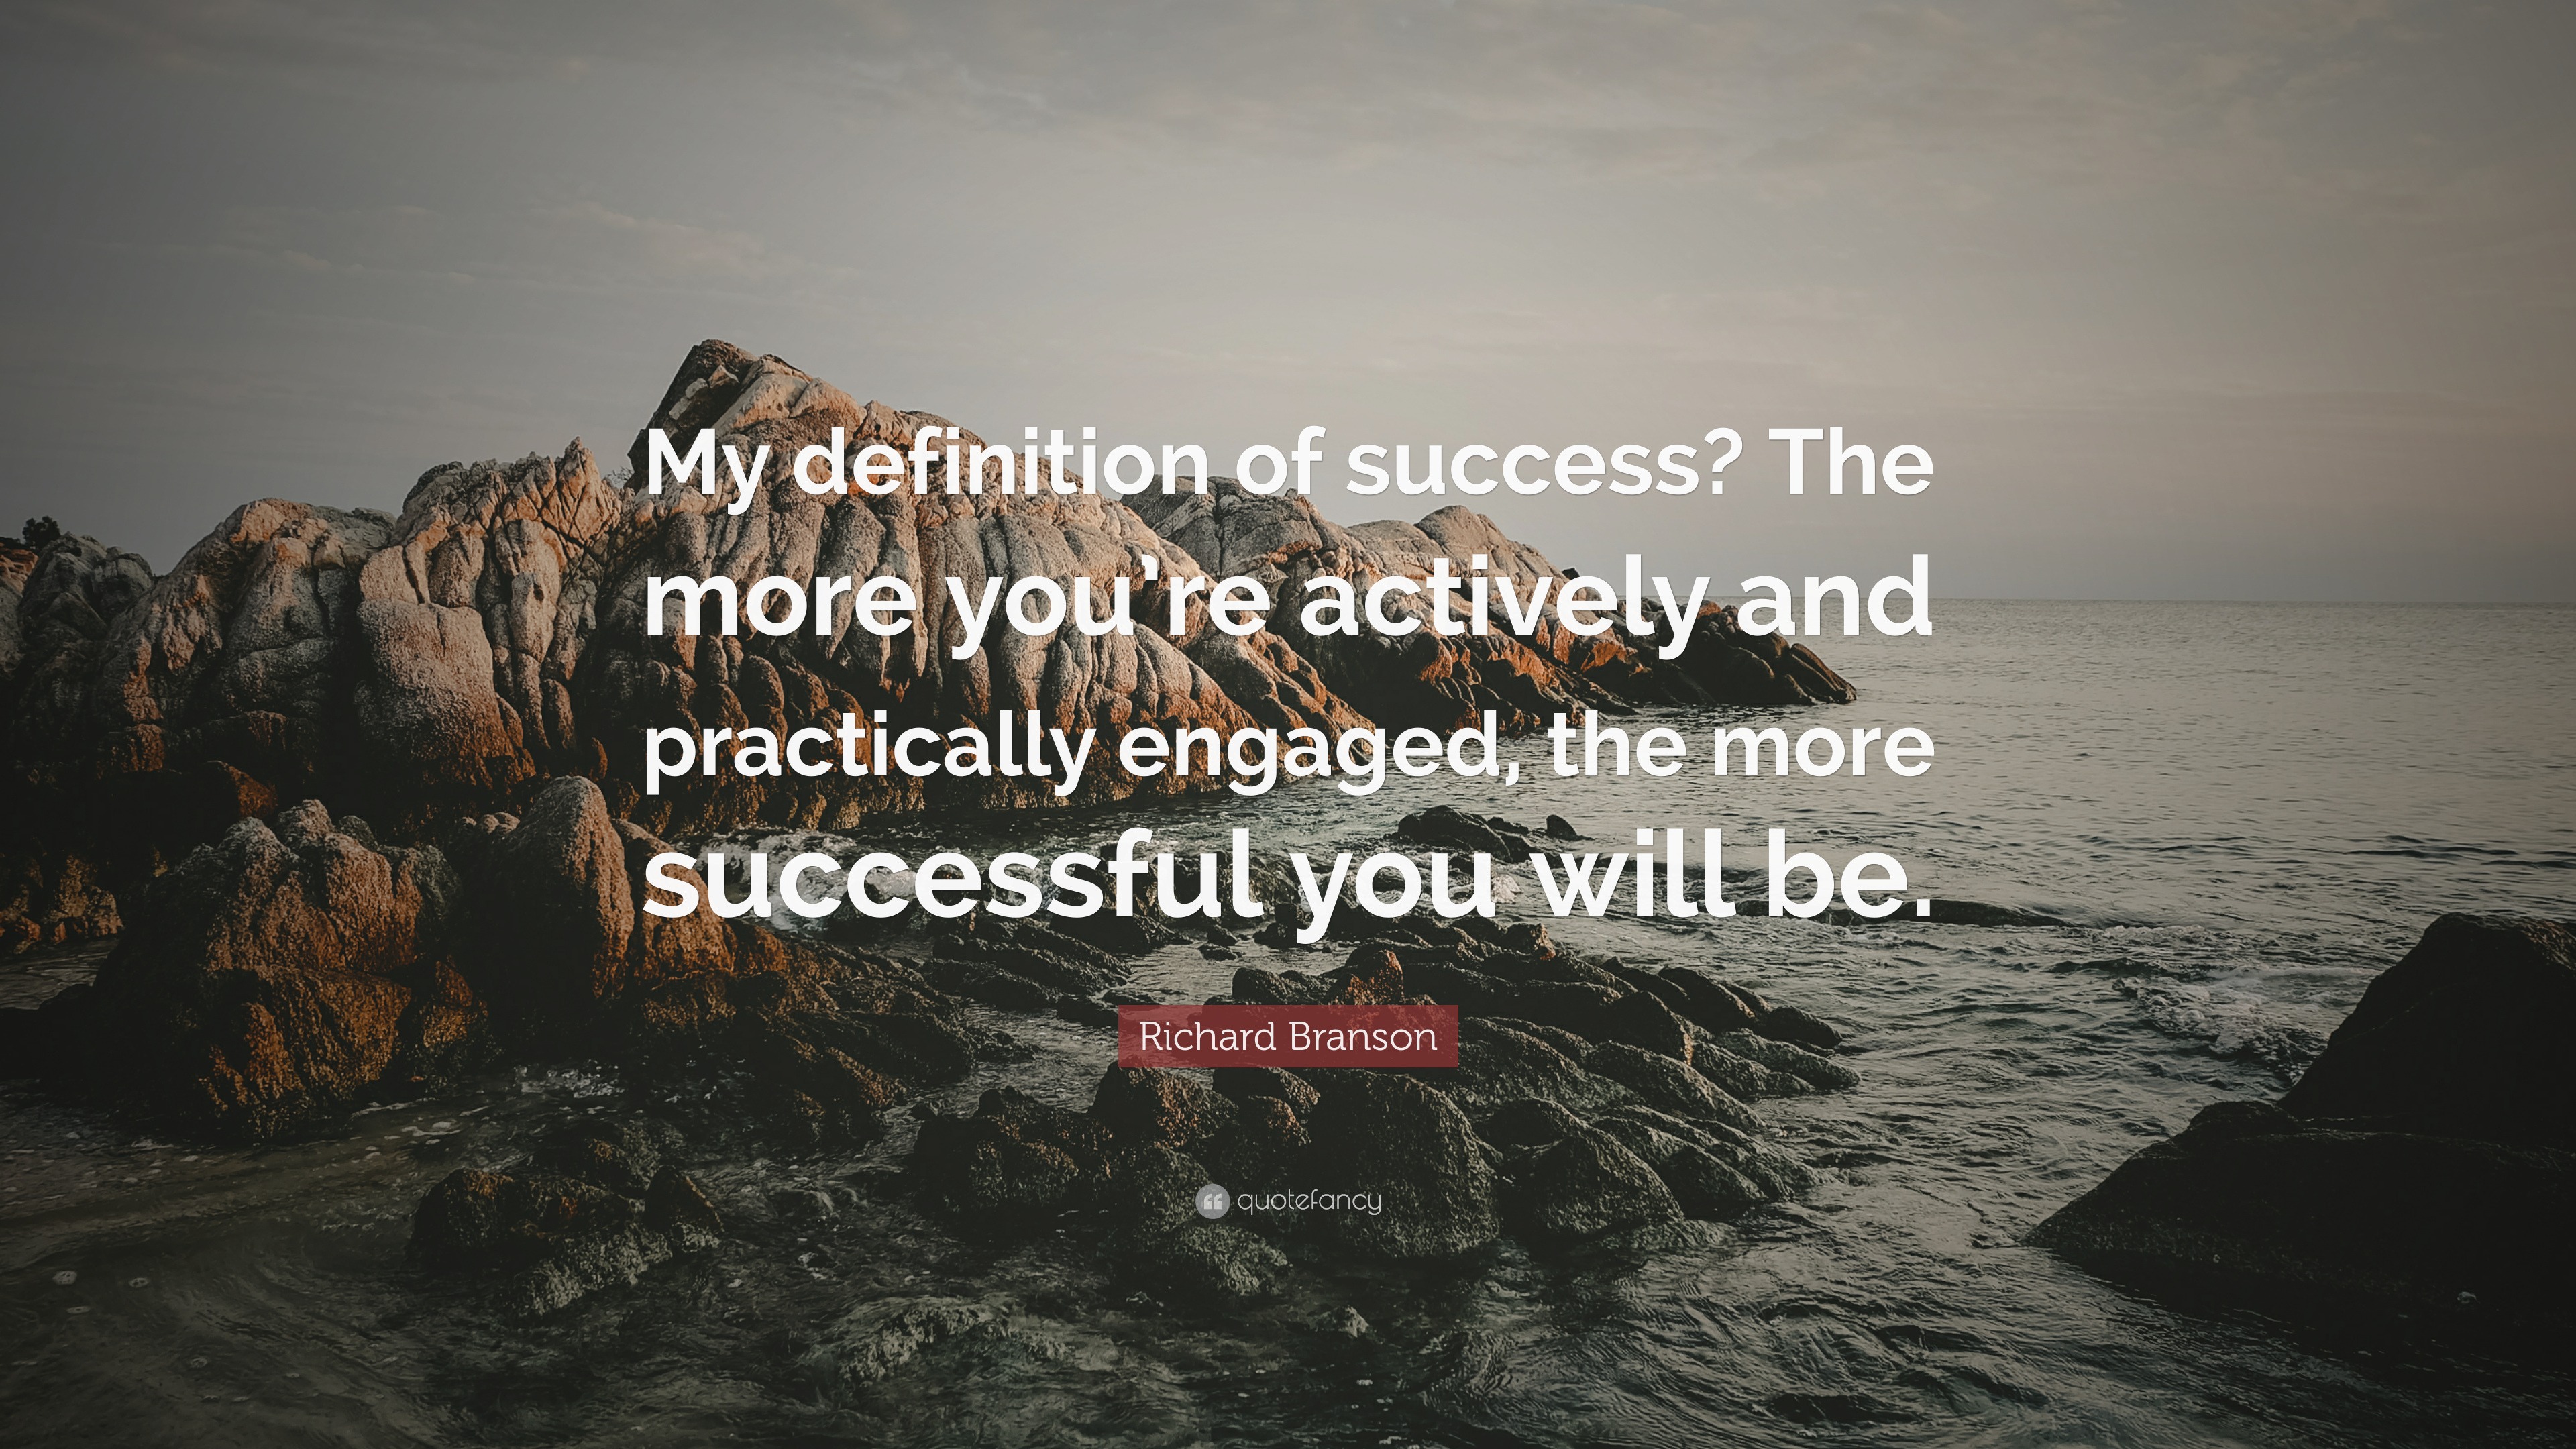 Richard Branson Quote: “My definition of success? The more you’re